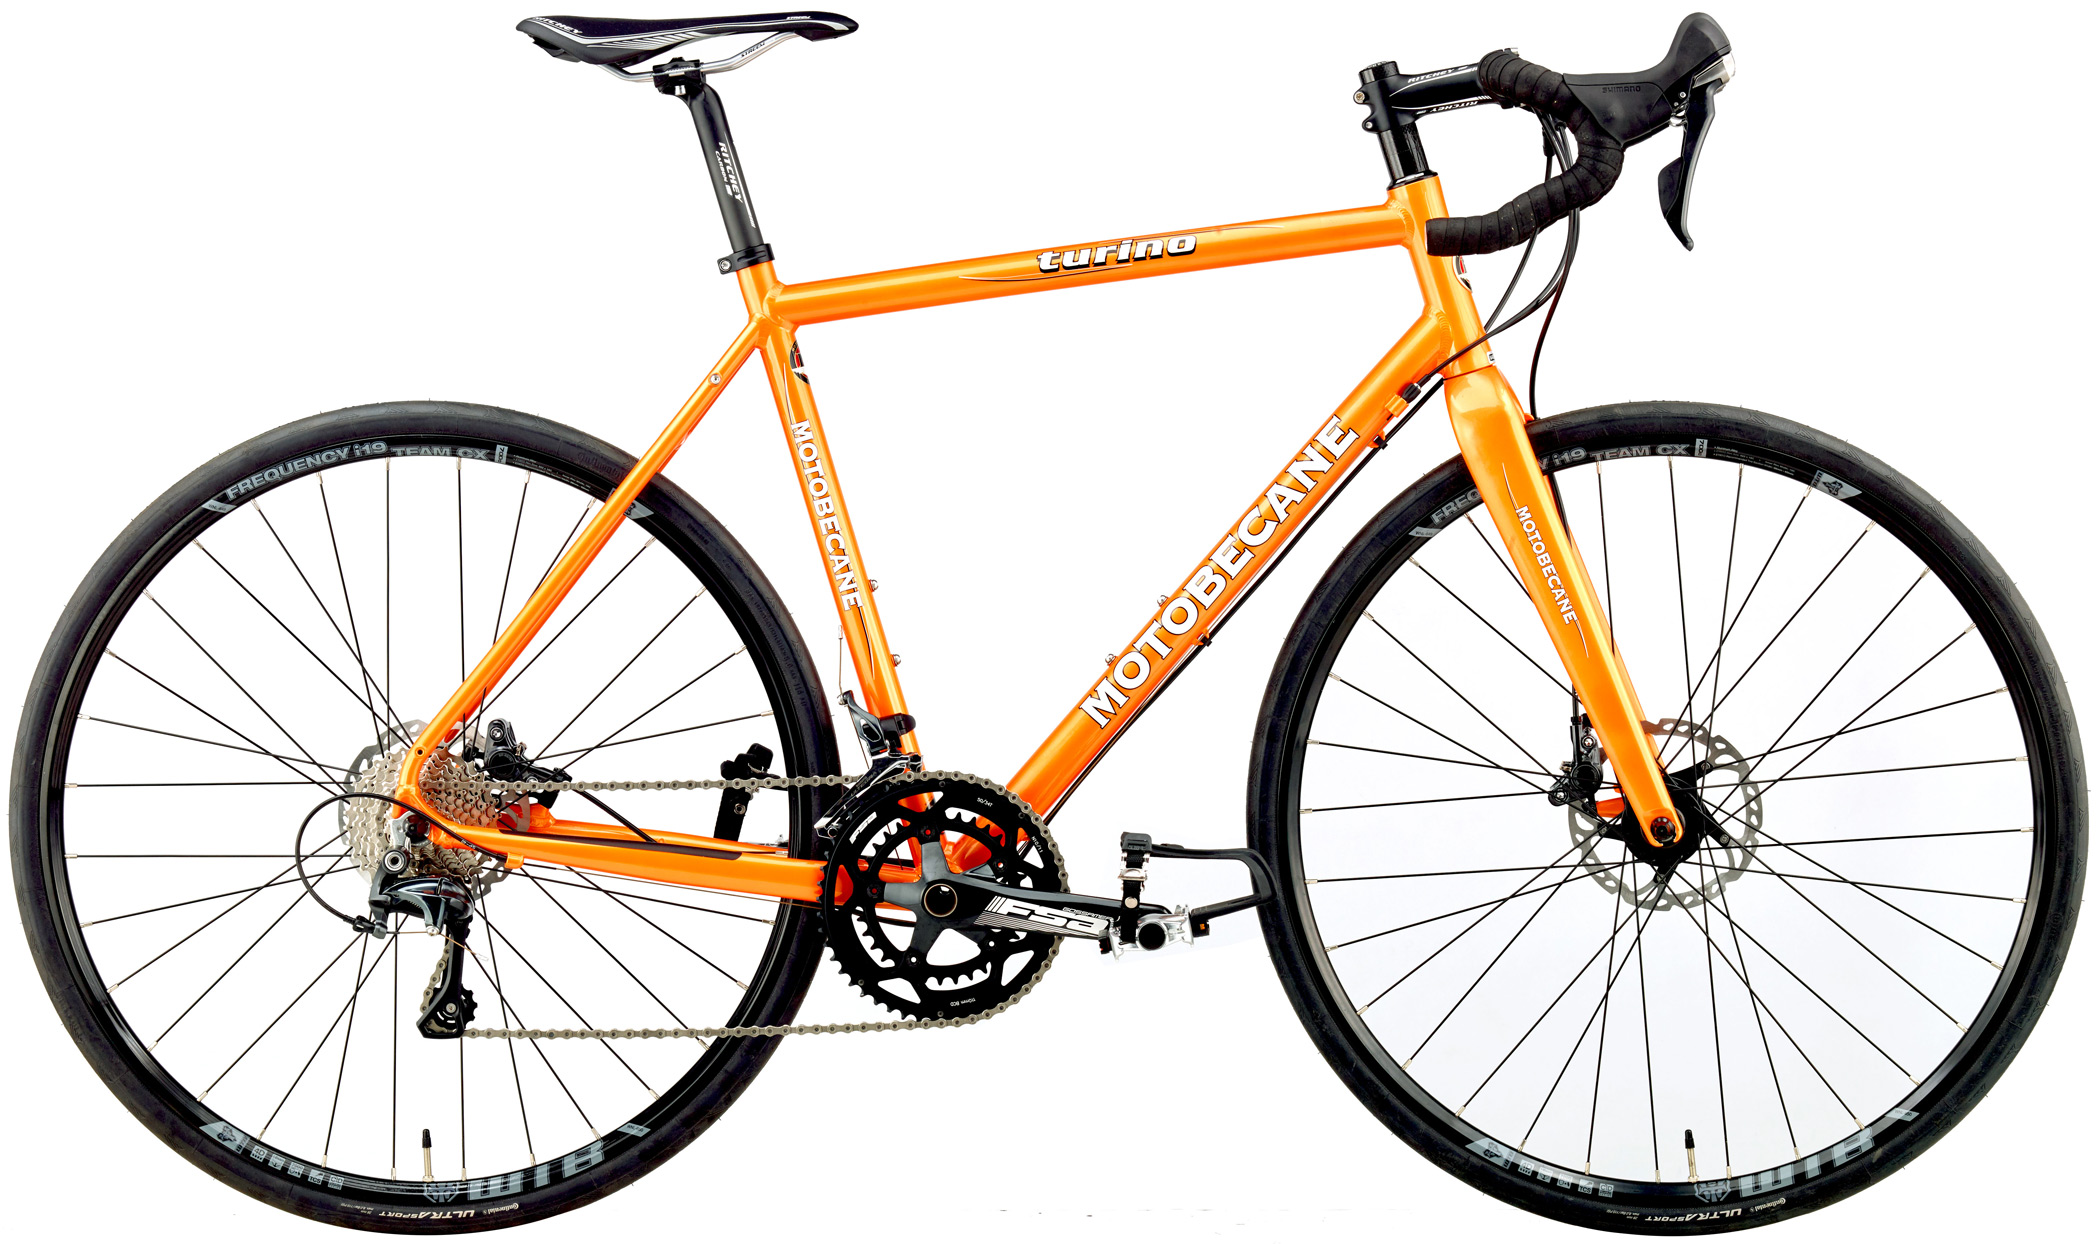 Save Up to 60% Off Disc Brake Road Bikes